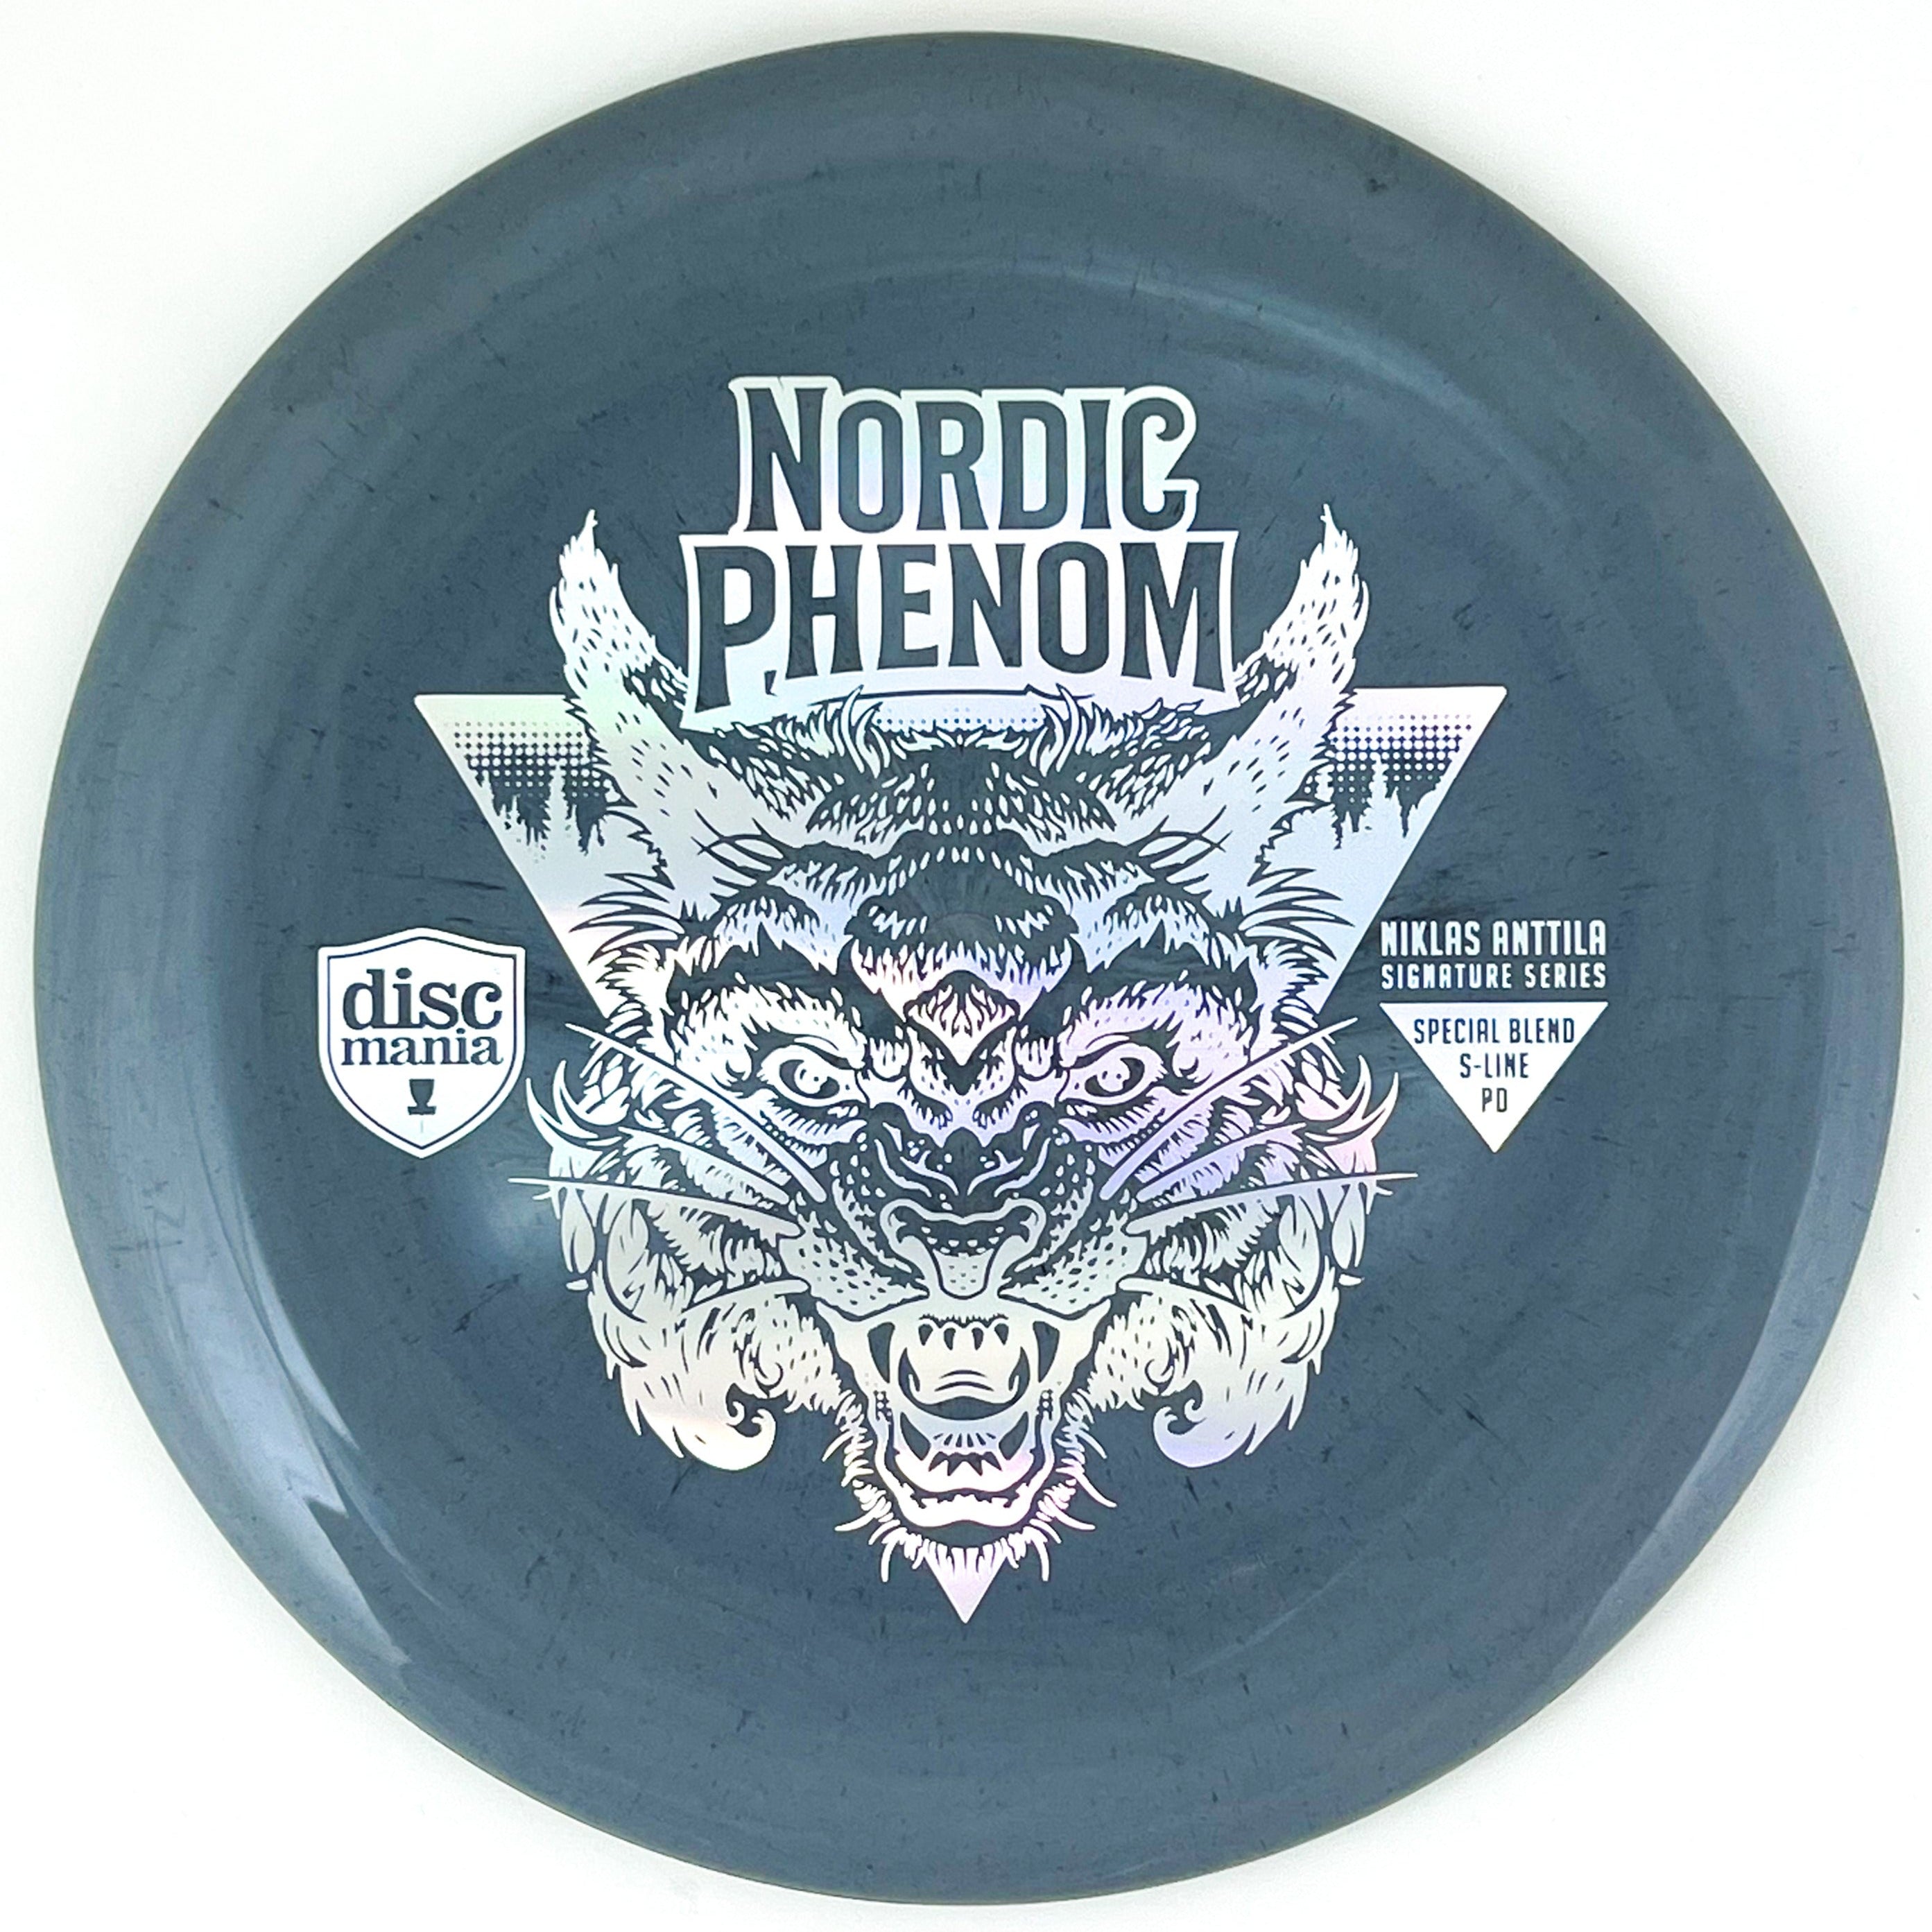 Charcoal Niklas Anttila Signiture Series Nordic Phenom S-Line PD disc golf distance driver by Discmania Golf Discs.